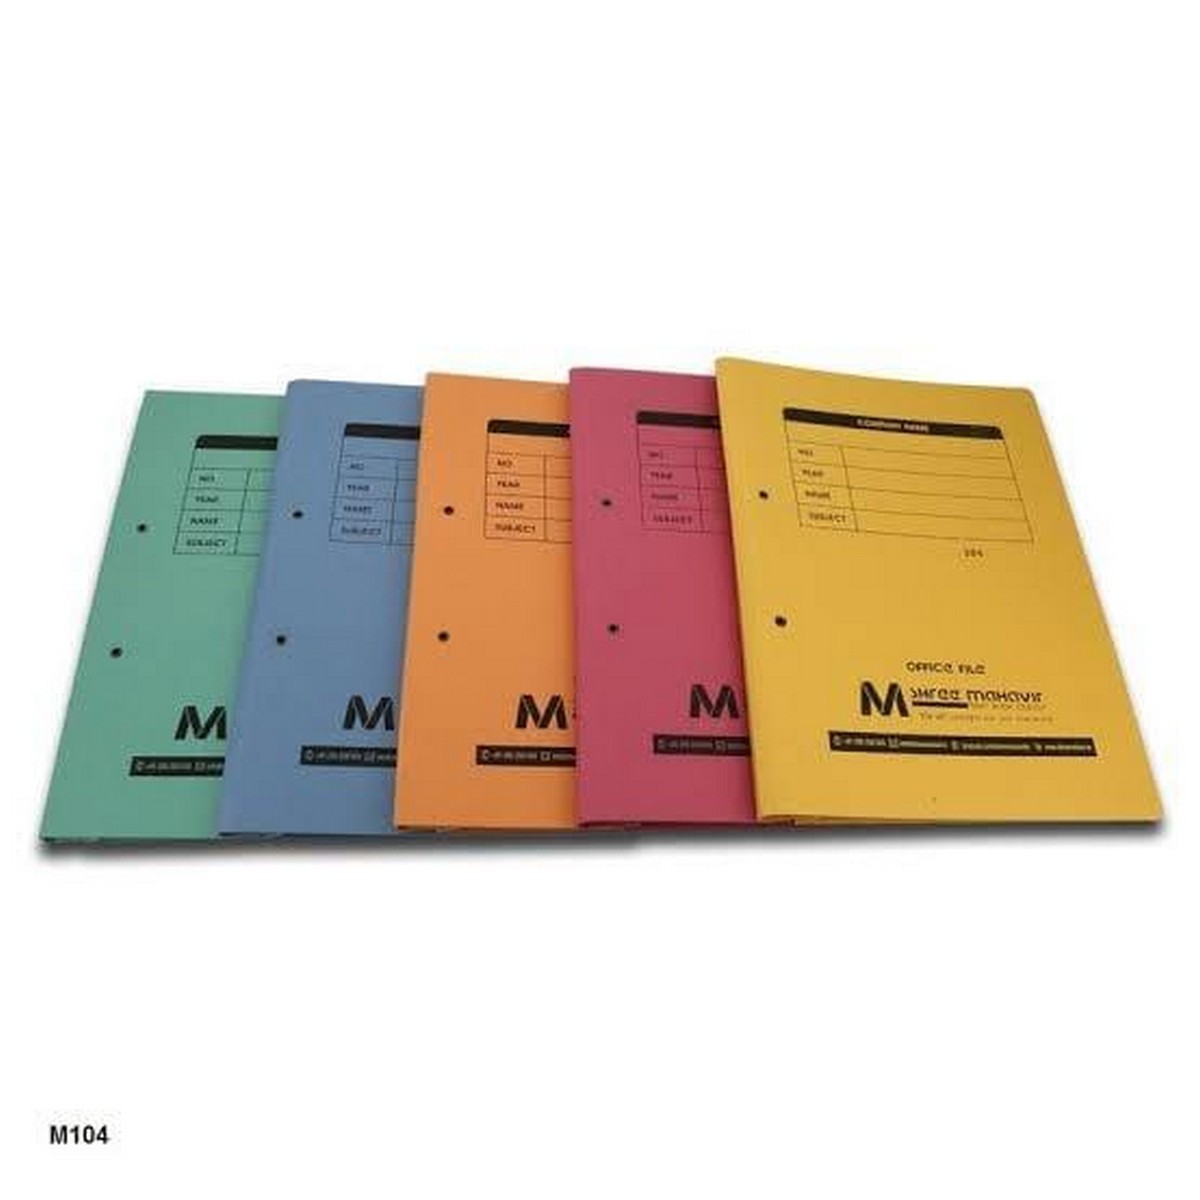 Pack of 10 files) Office Card Files - Amazing price